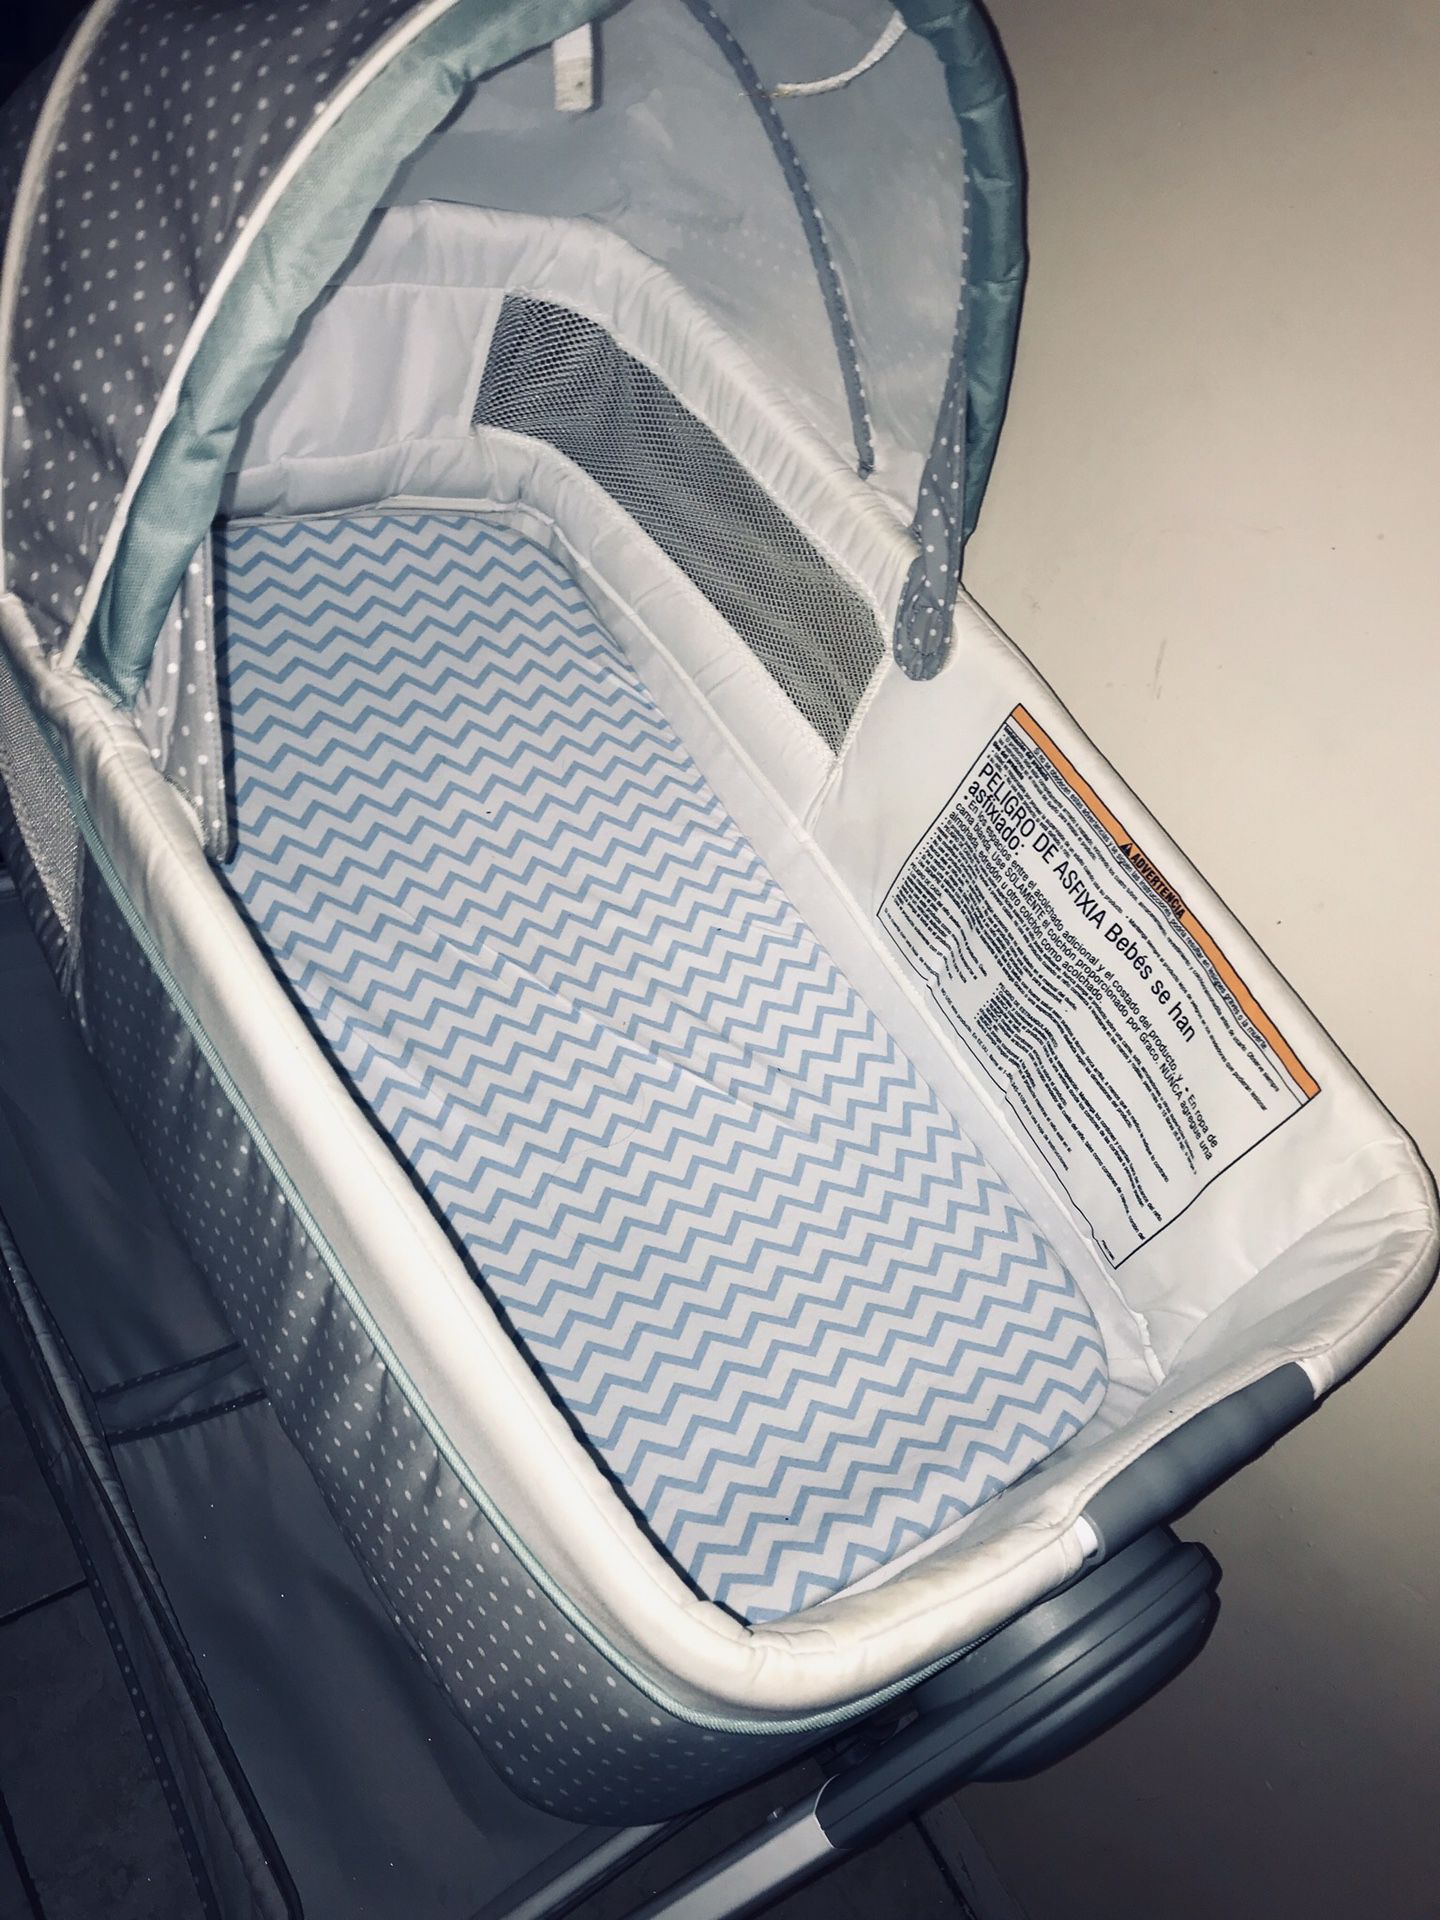 Graco bassinet/changing table and a little baby swing